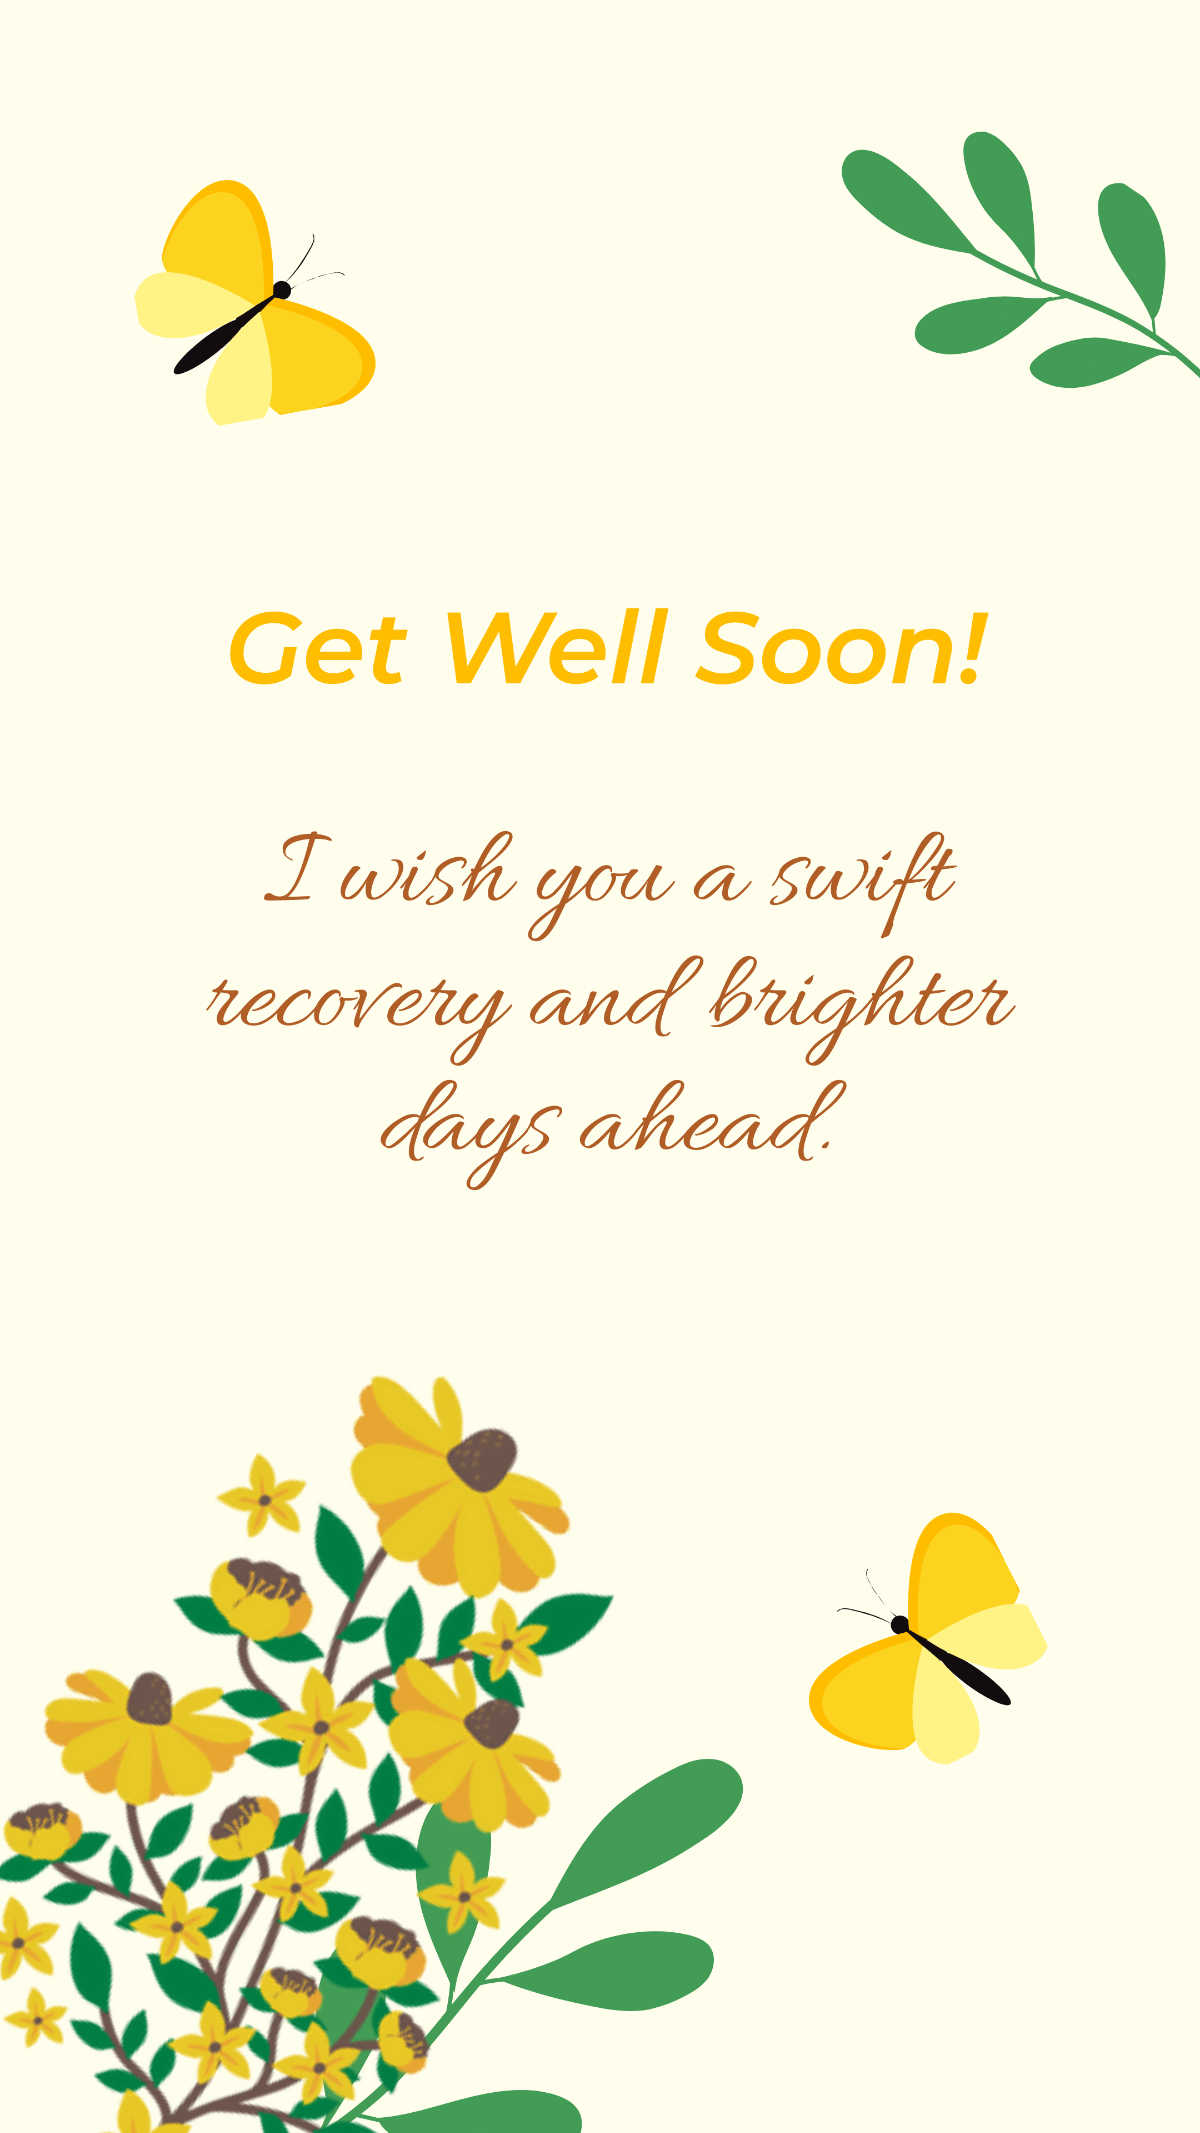 Get Well Soon Greeting Gift Card